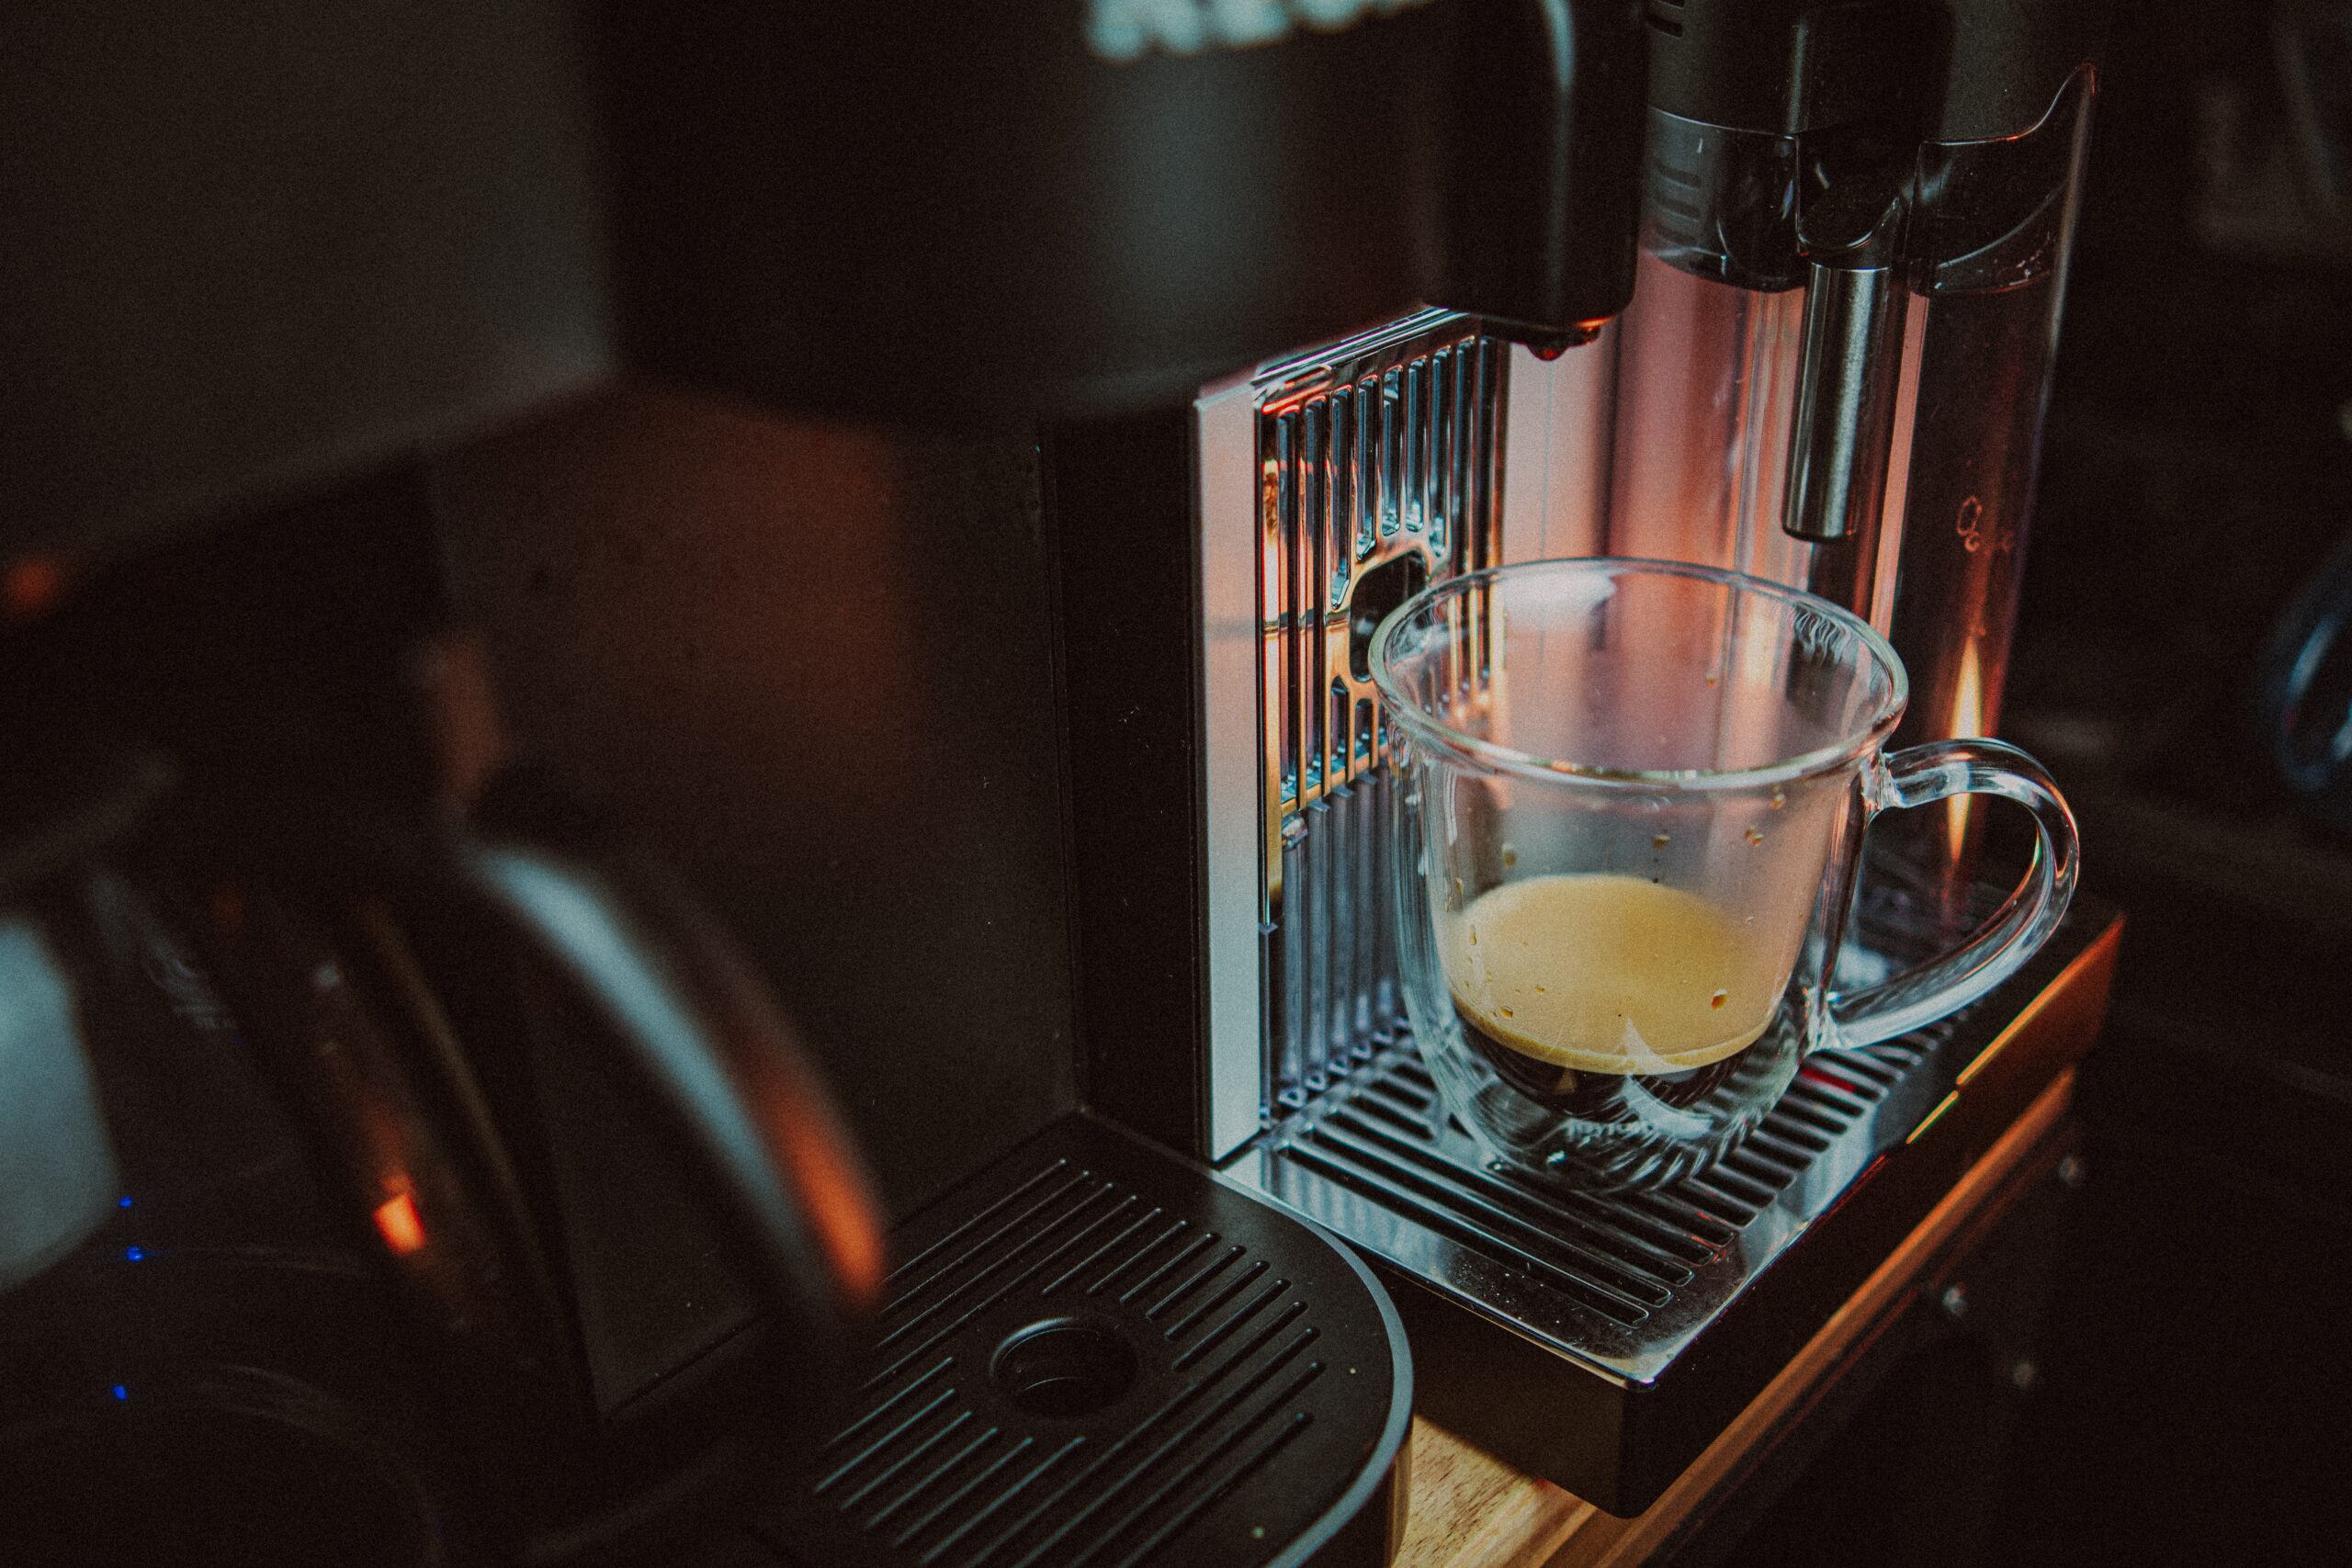 Install an at-home coffee bar with a coffee machine, syrups, a topping station, mugs and decor. This kitchen trend has been all over TikTok and will continue to be a trend in 2024. Pictured: A coffee machine.